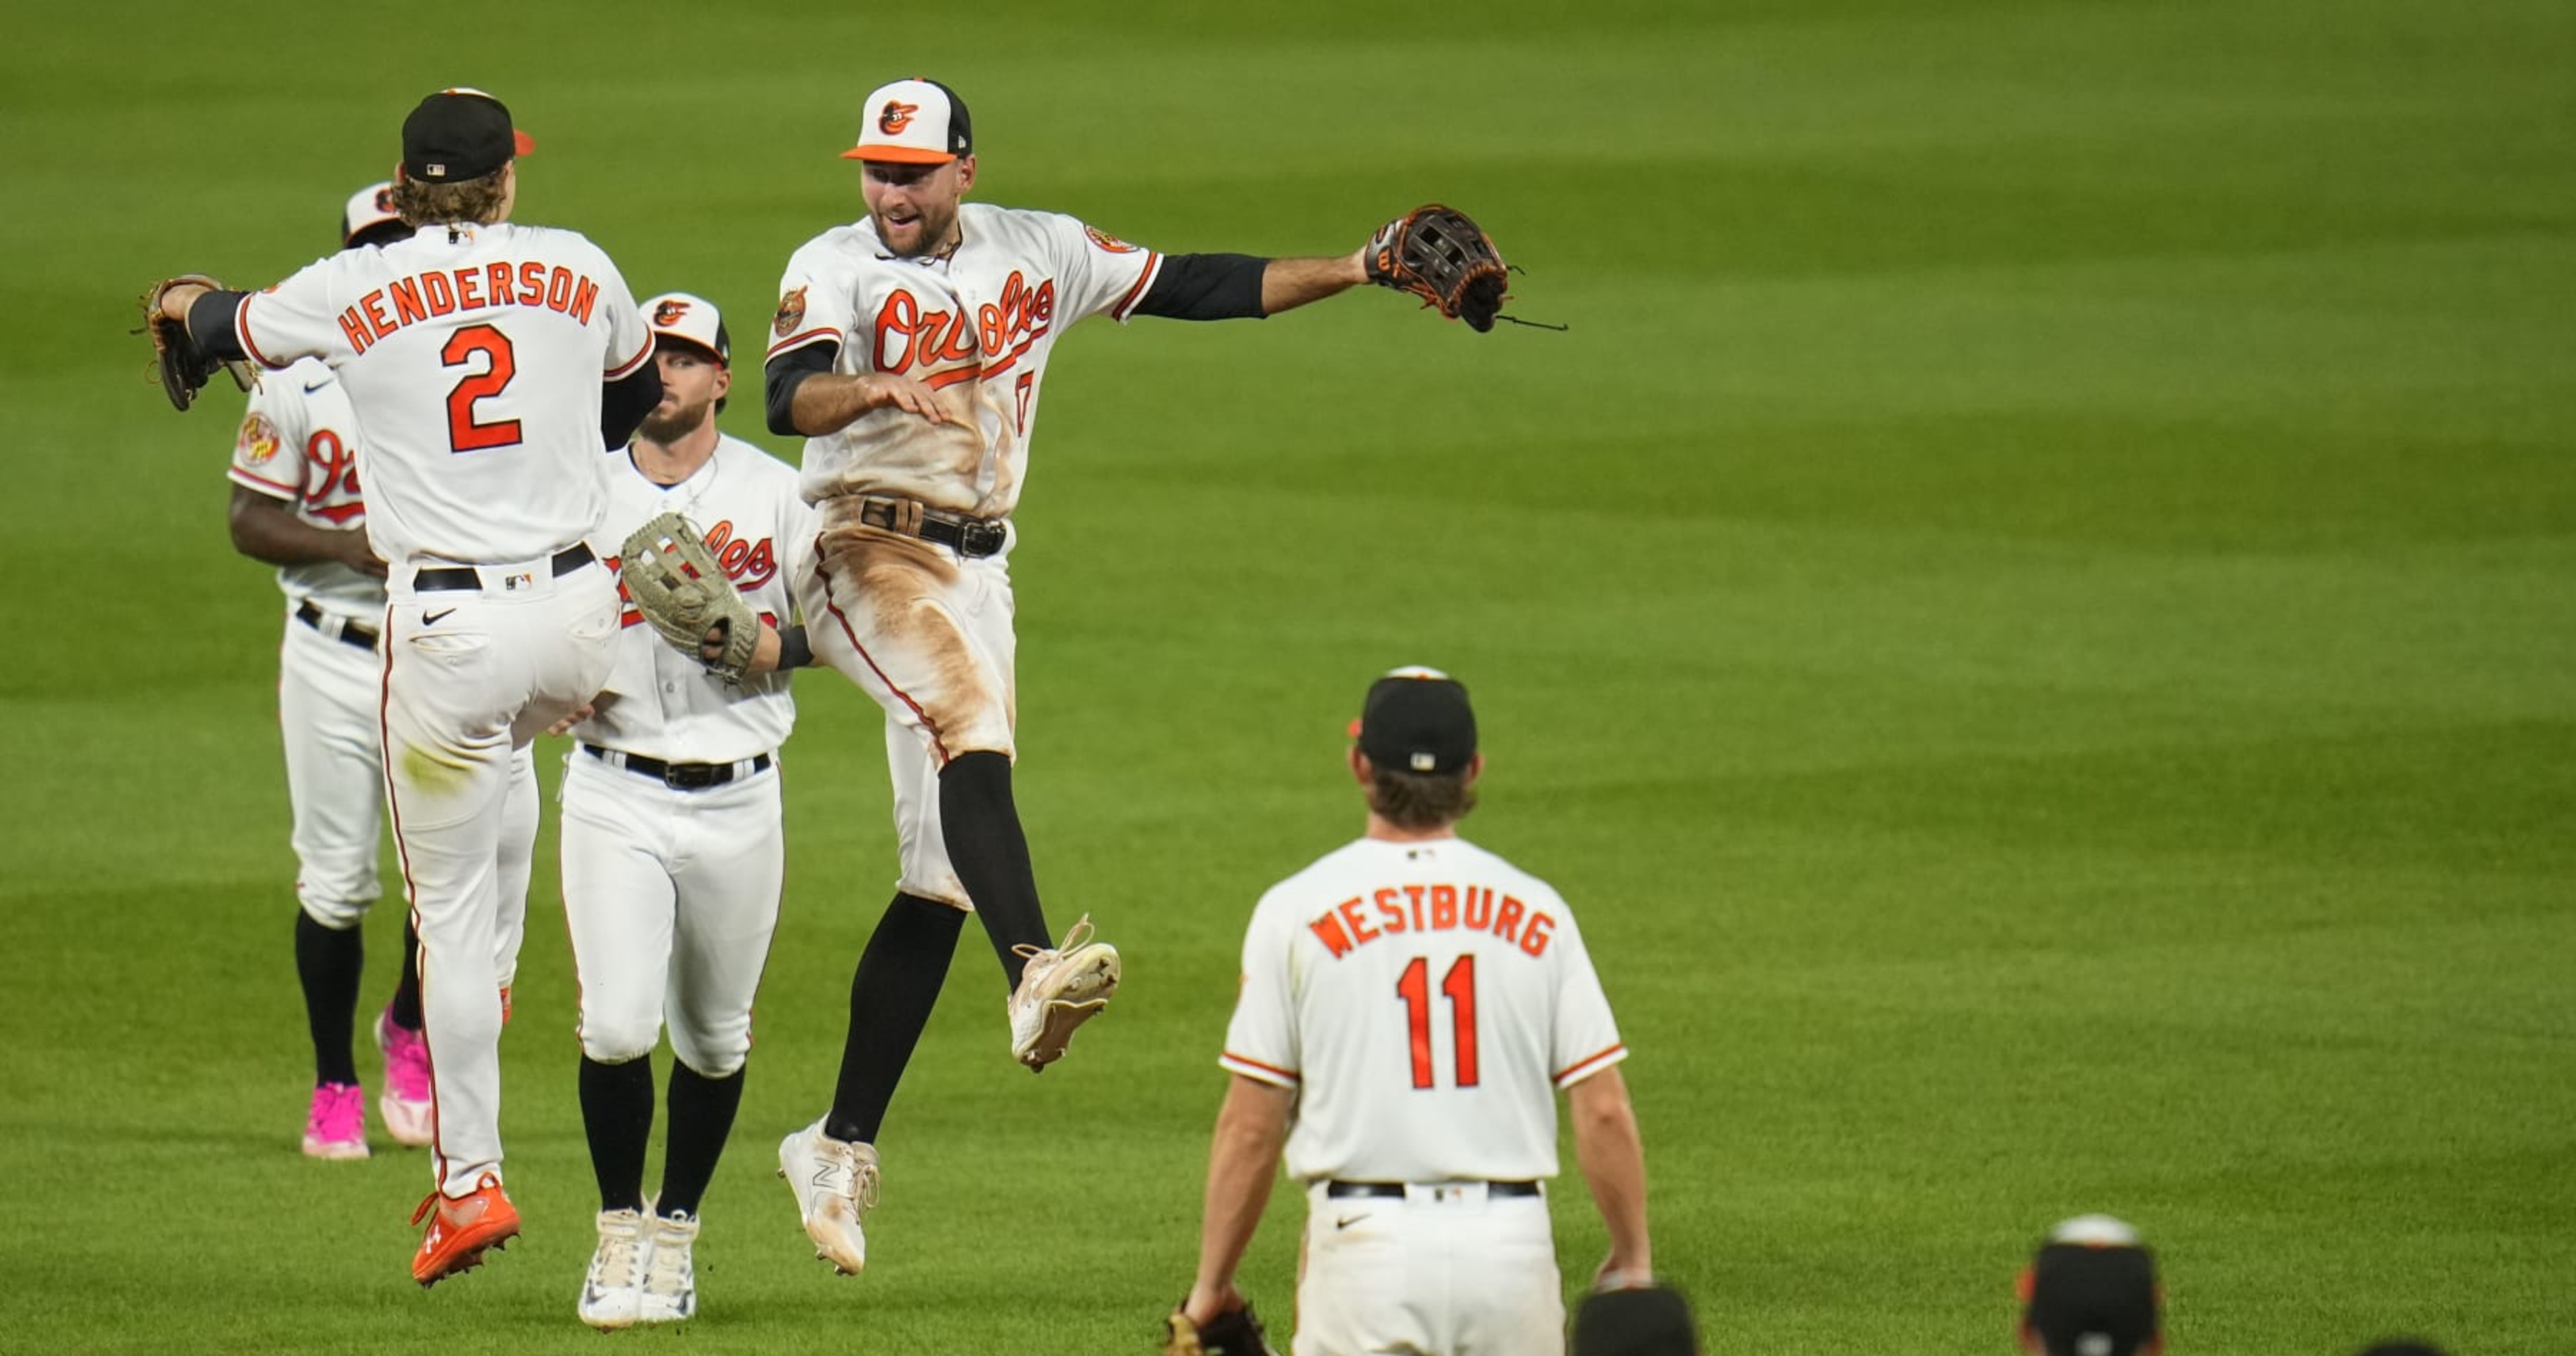 Orioles score 8 runs in 7th to beat Yankees, Nestor Cortes struggles late